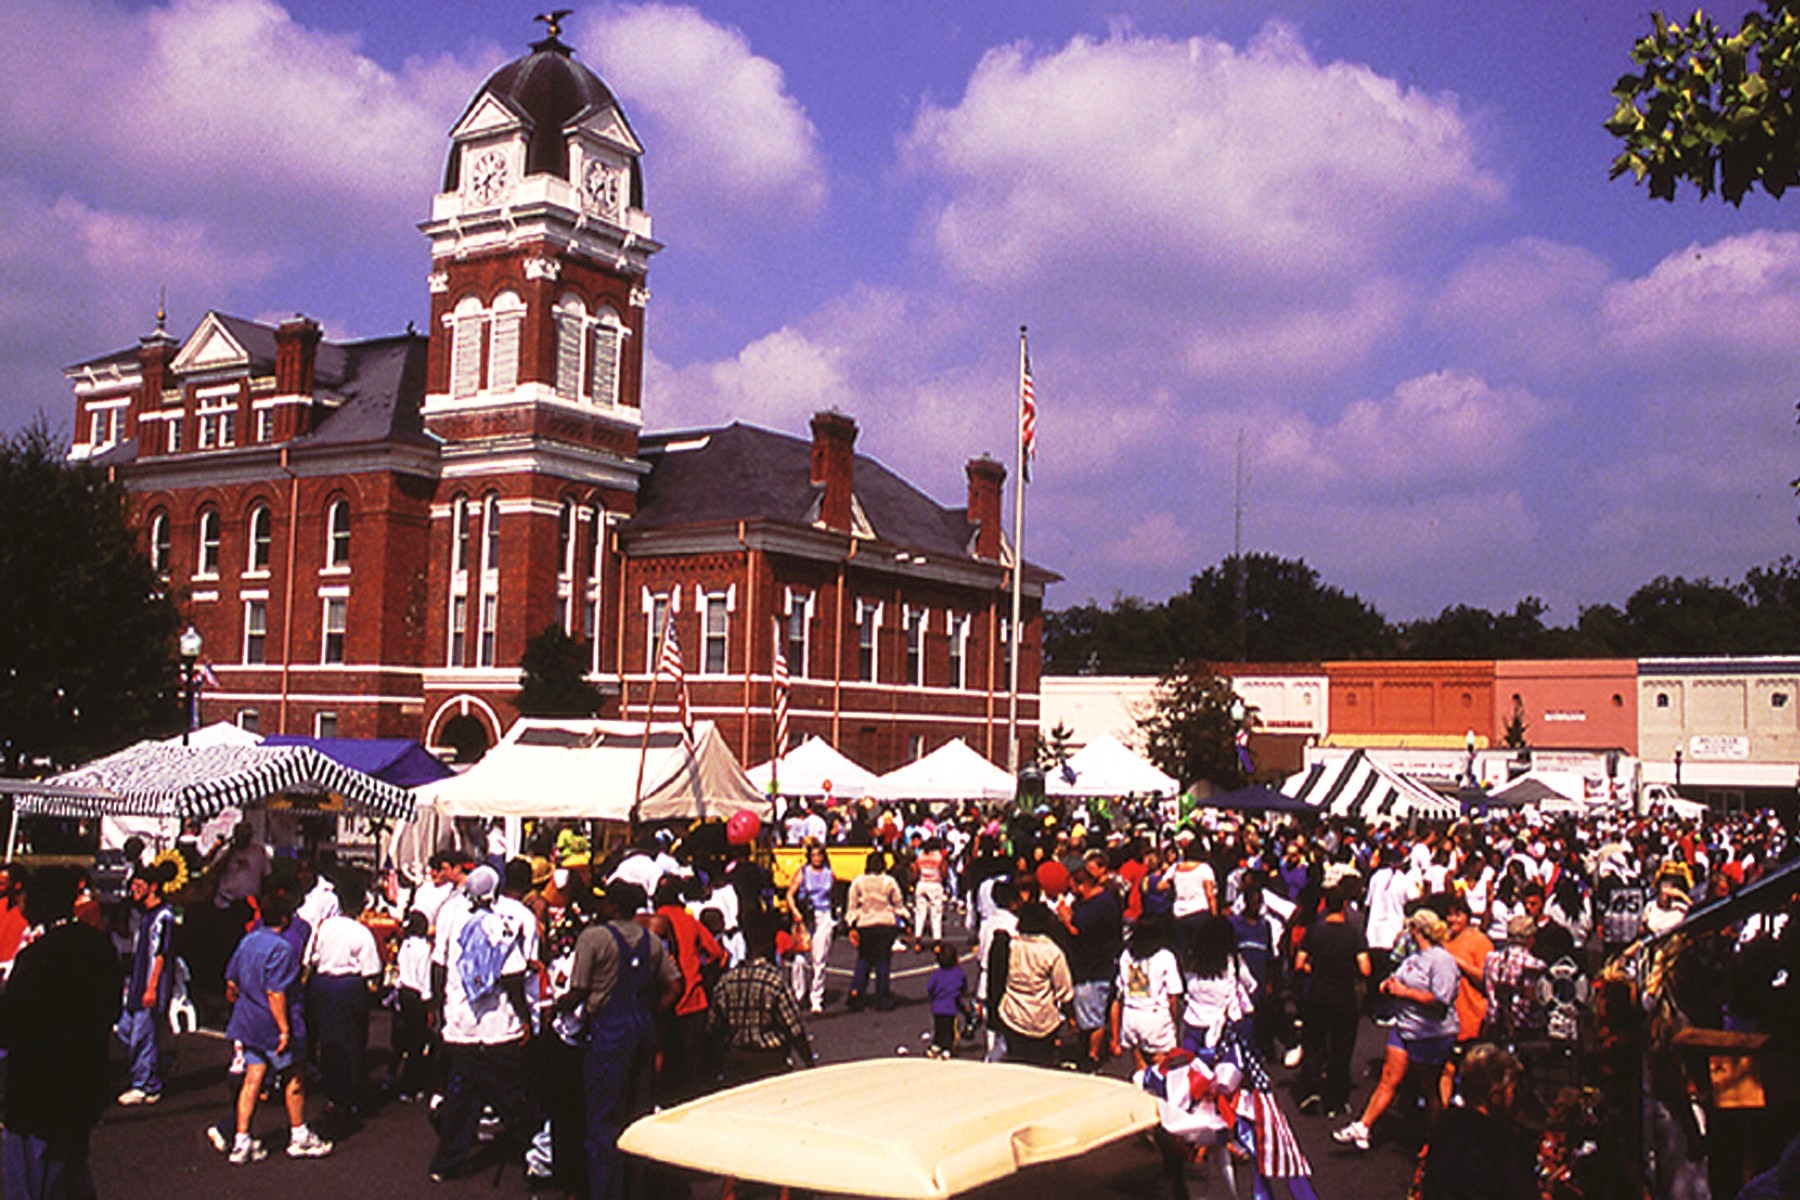 The Washington County Courthouse in Sandersville, Georgia was built in 1869  and added to in 1889 and 1939.